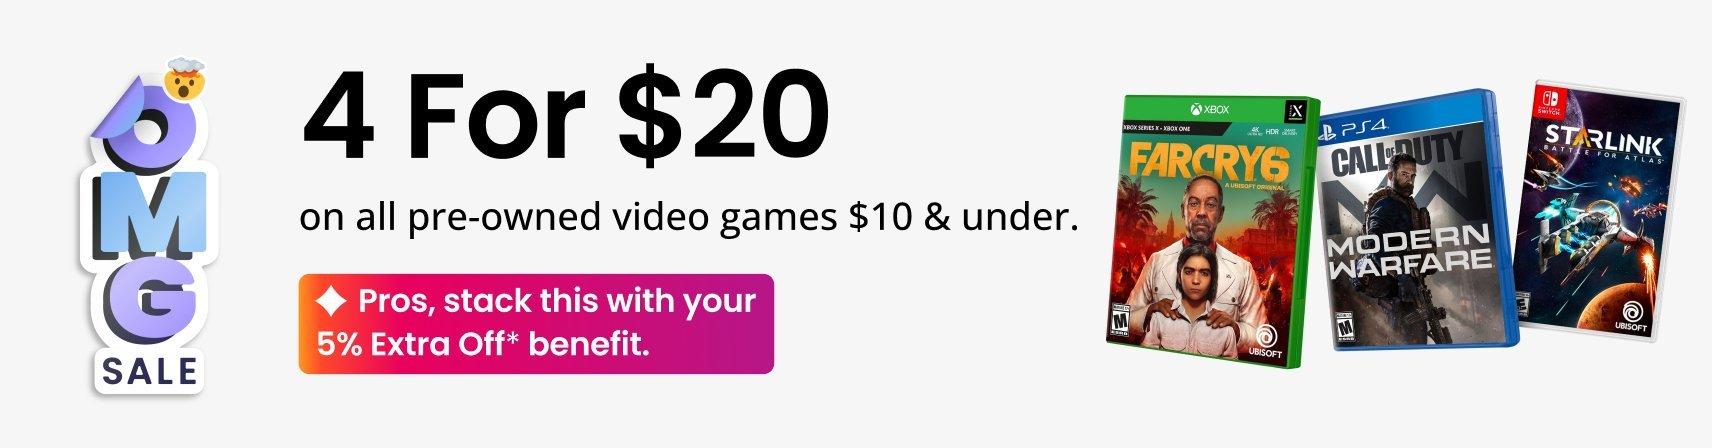 4 for $20 Pre-Owned Games Under $10